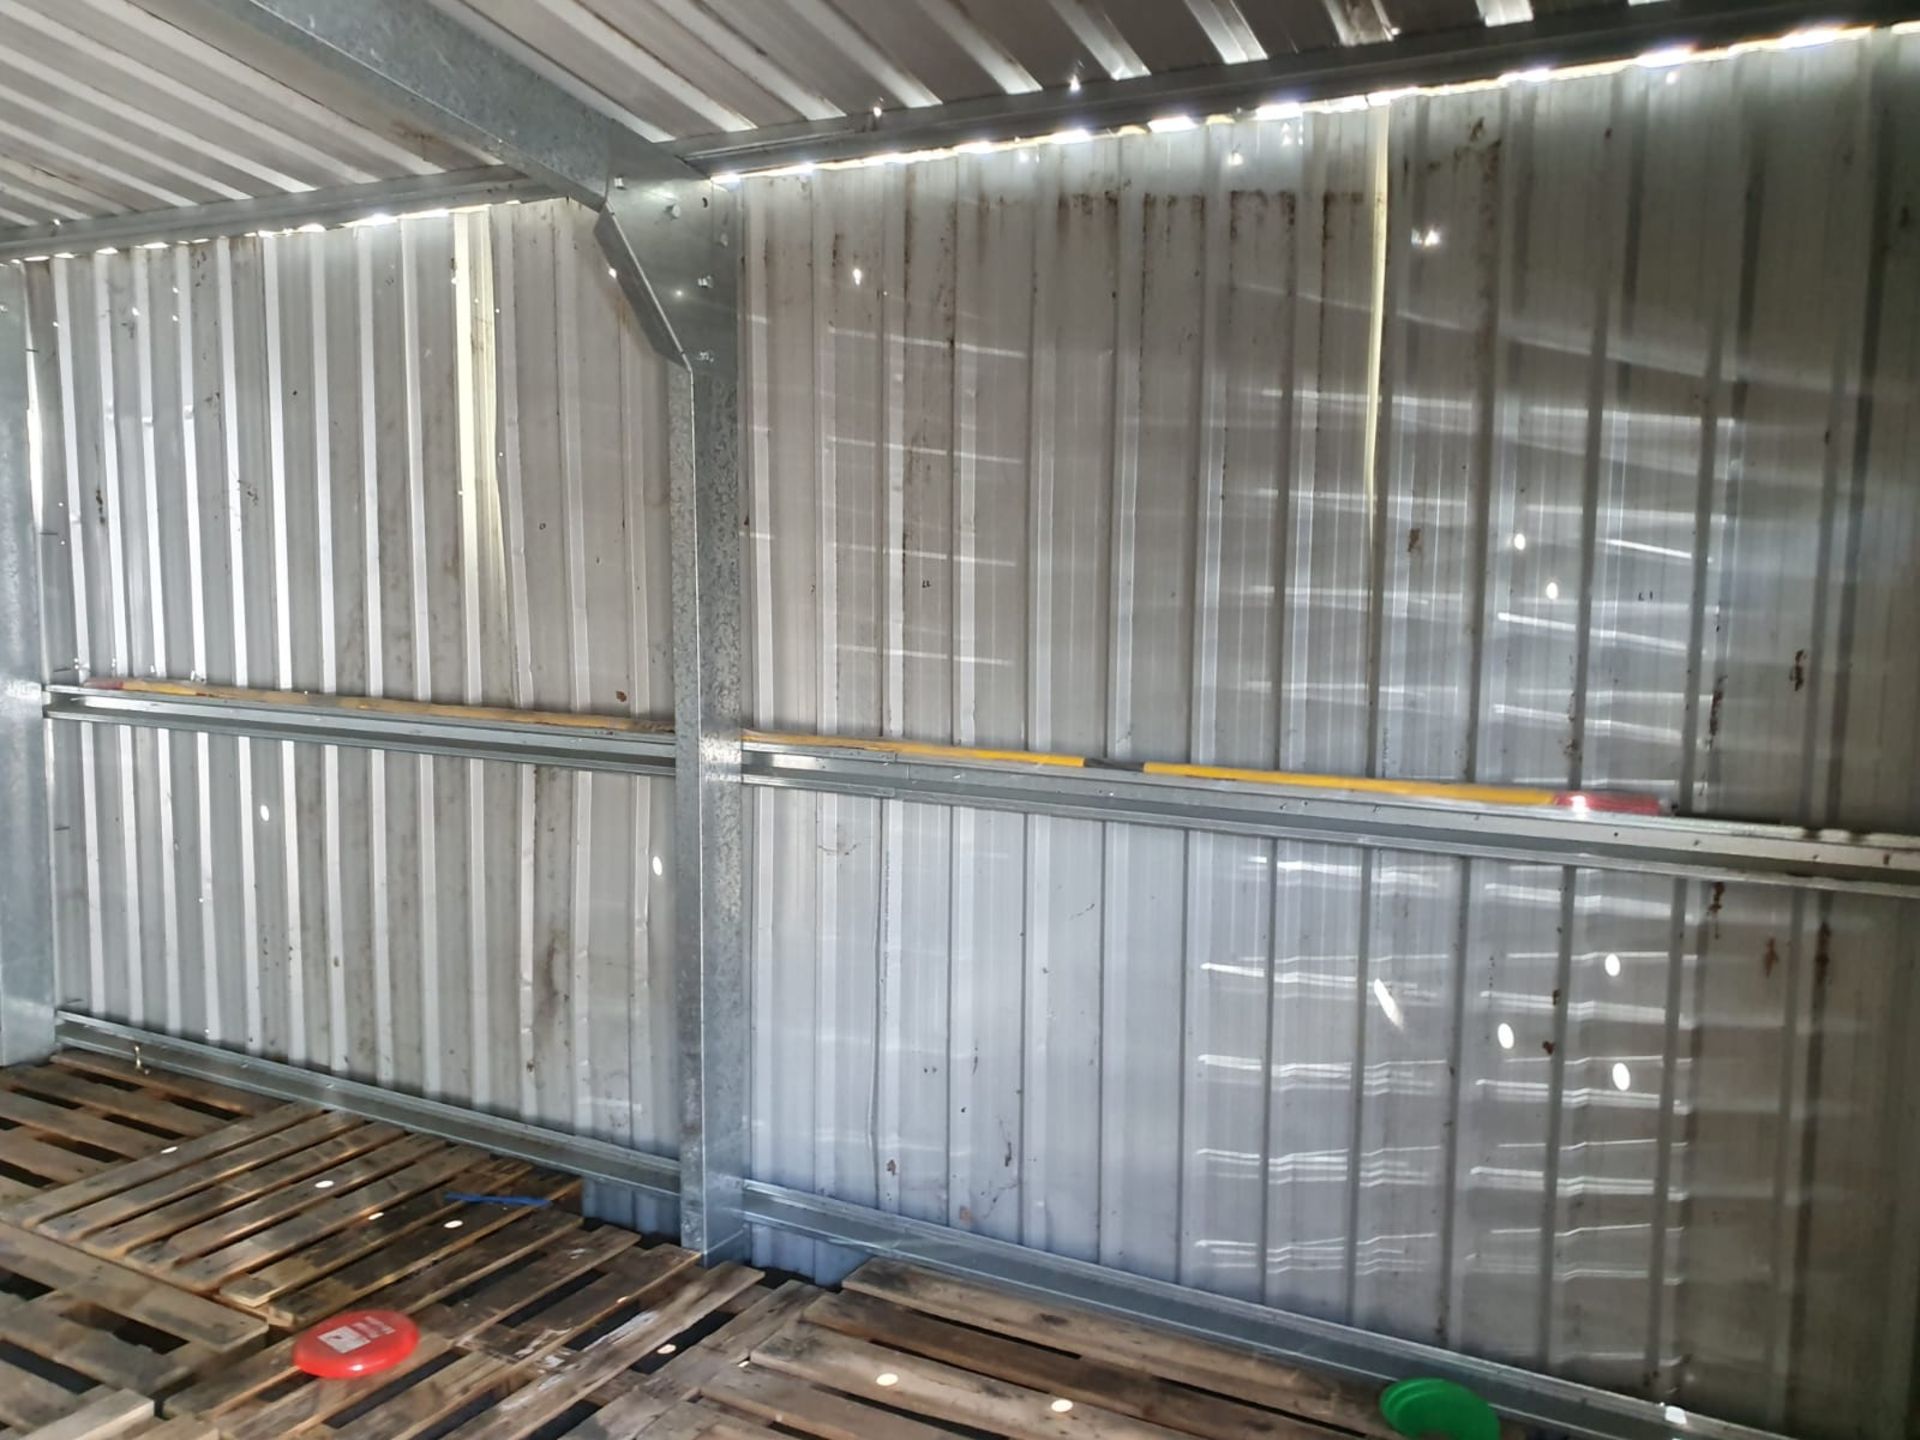 1 x Large Steel Storage Shed Container With Four Wooden Folding Doors - Approx Dimensions 5M x 5M - Image 2 of 18